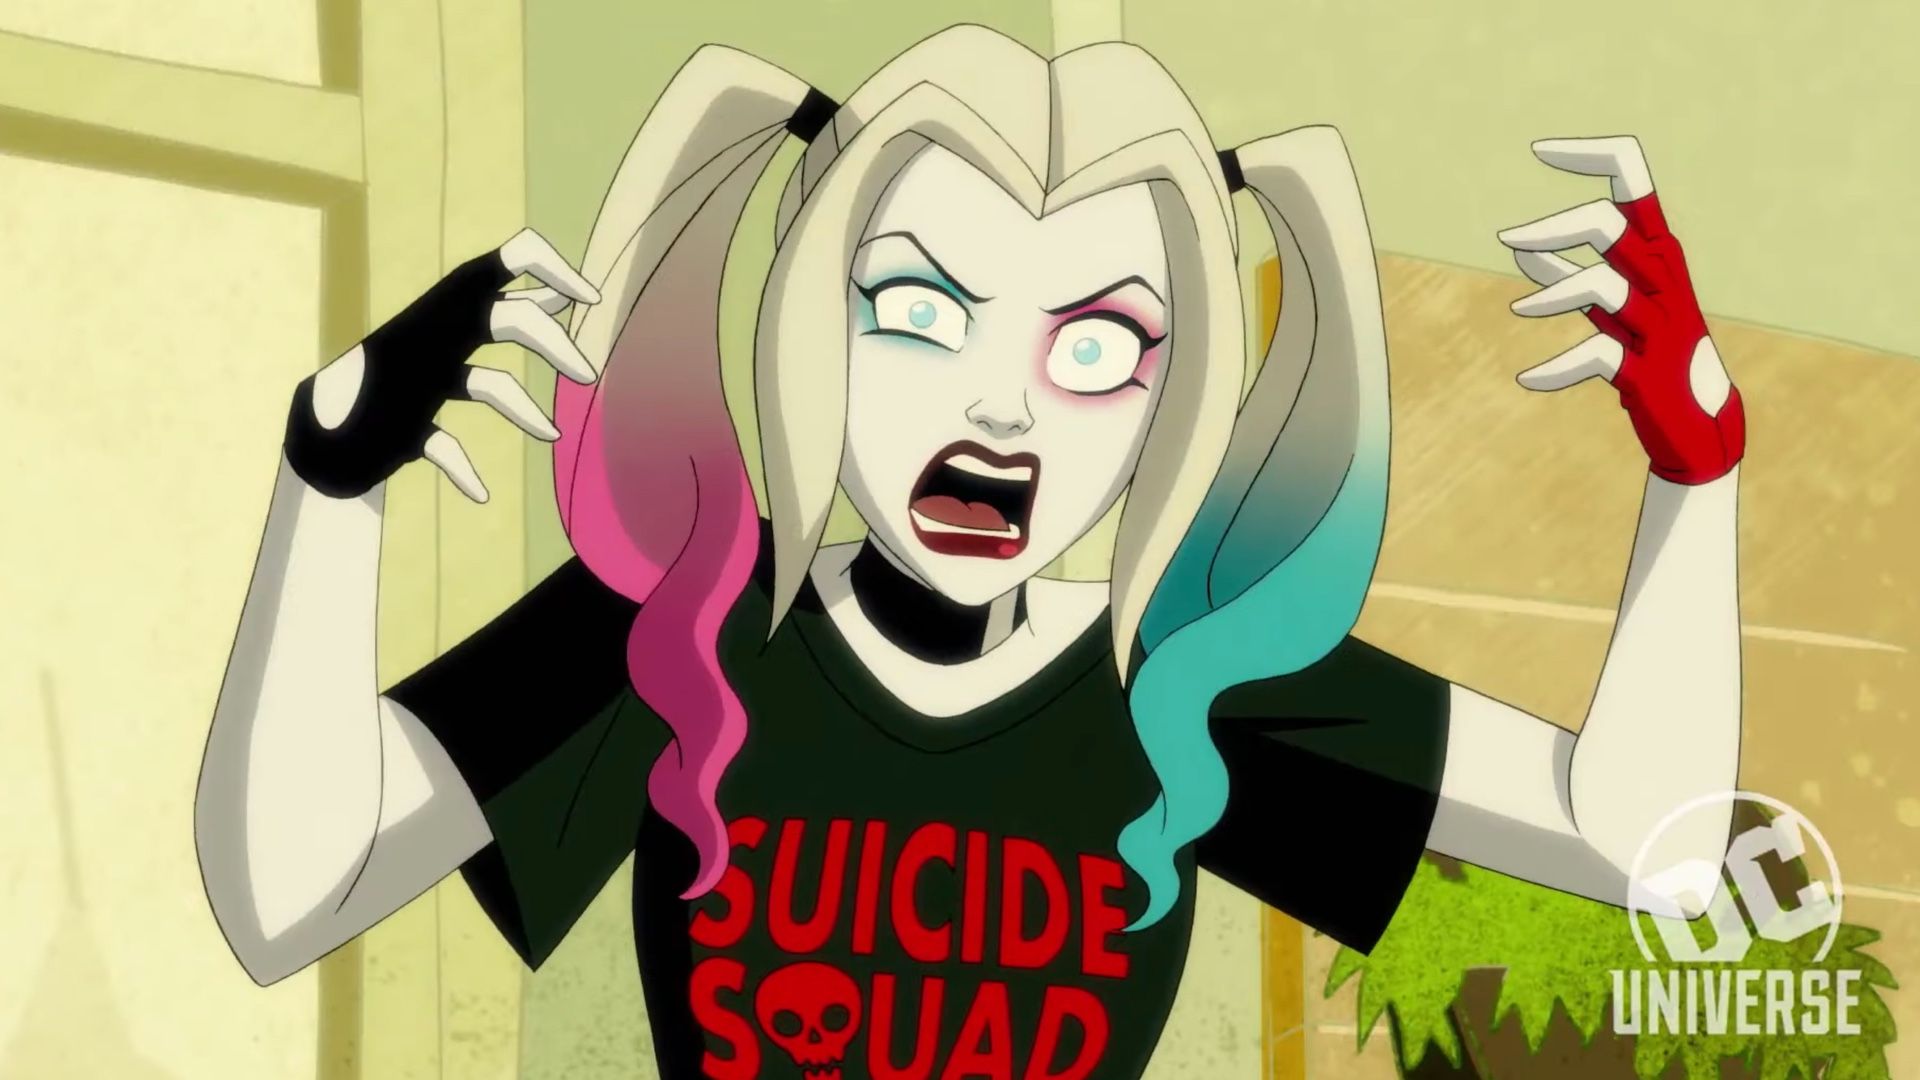 More Details on The HARLEY QUINN Animated Series Including the One